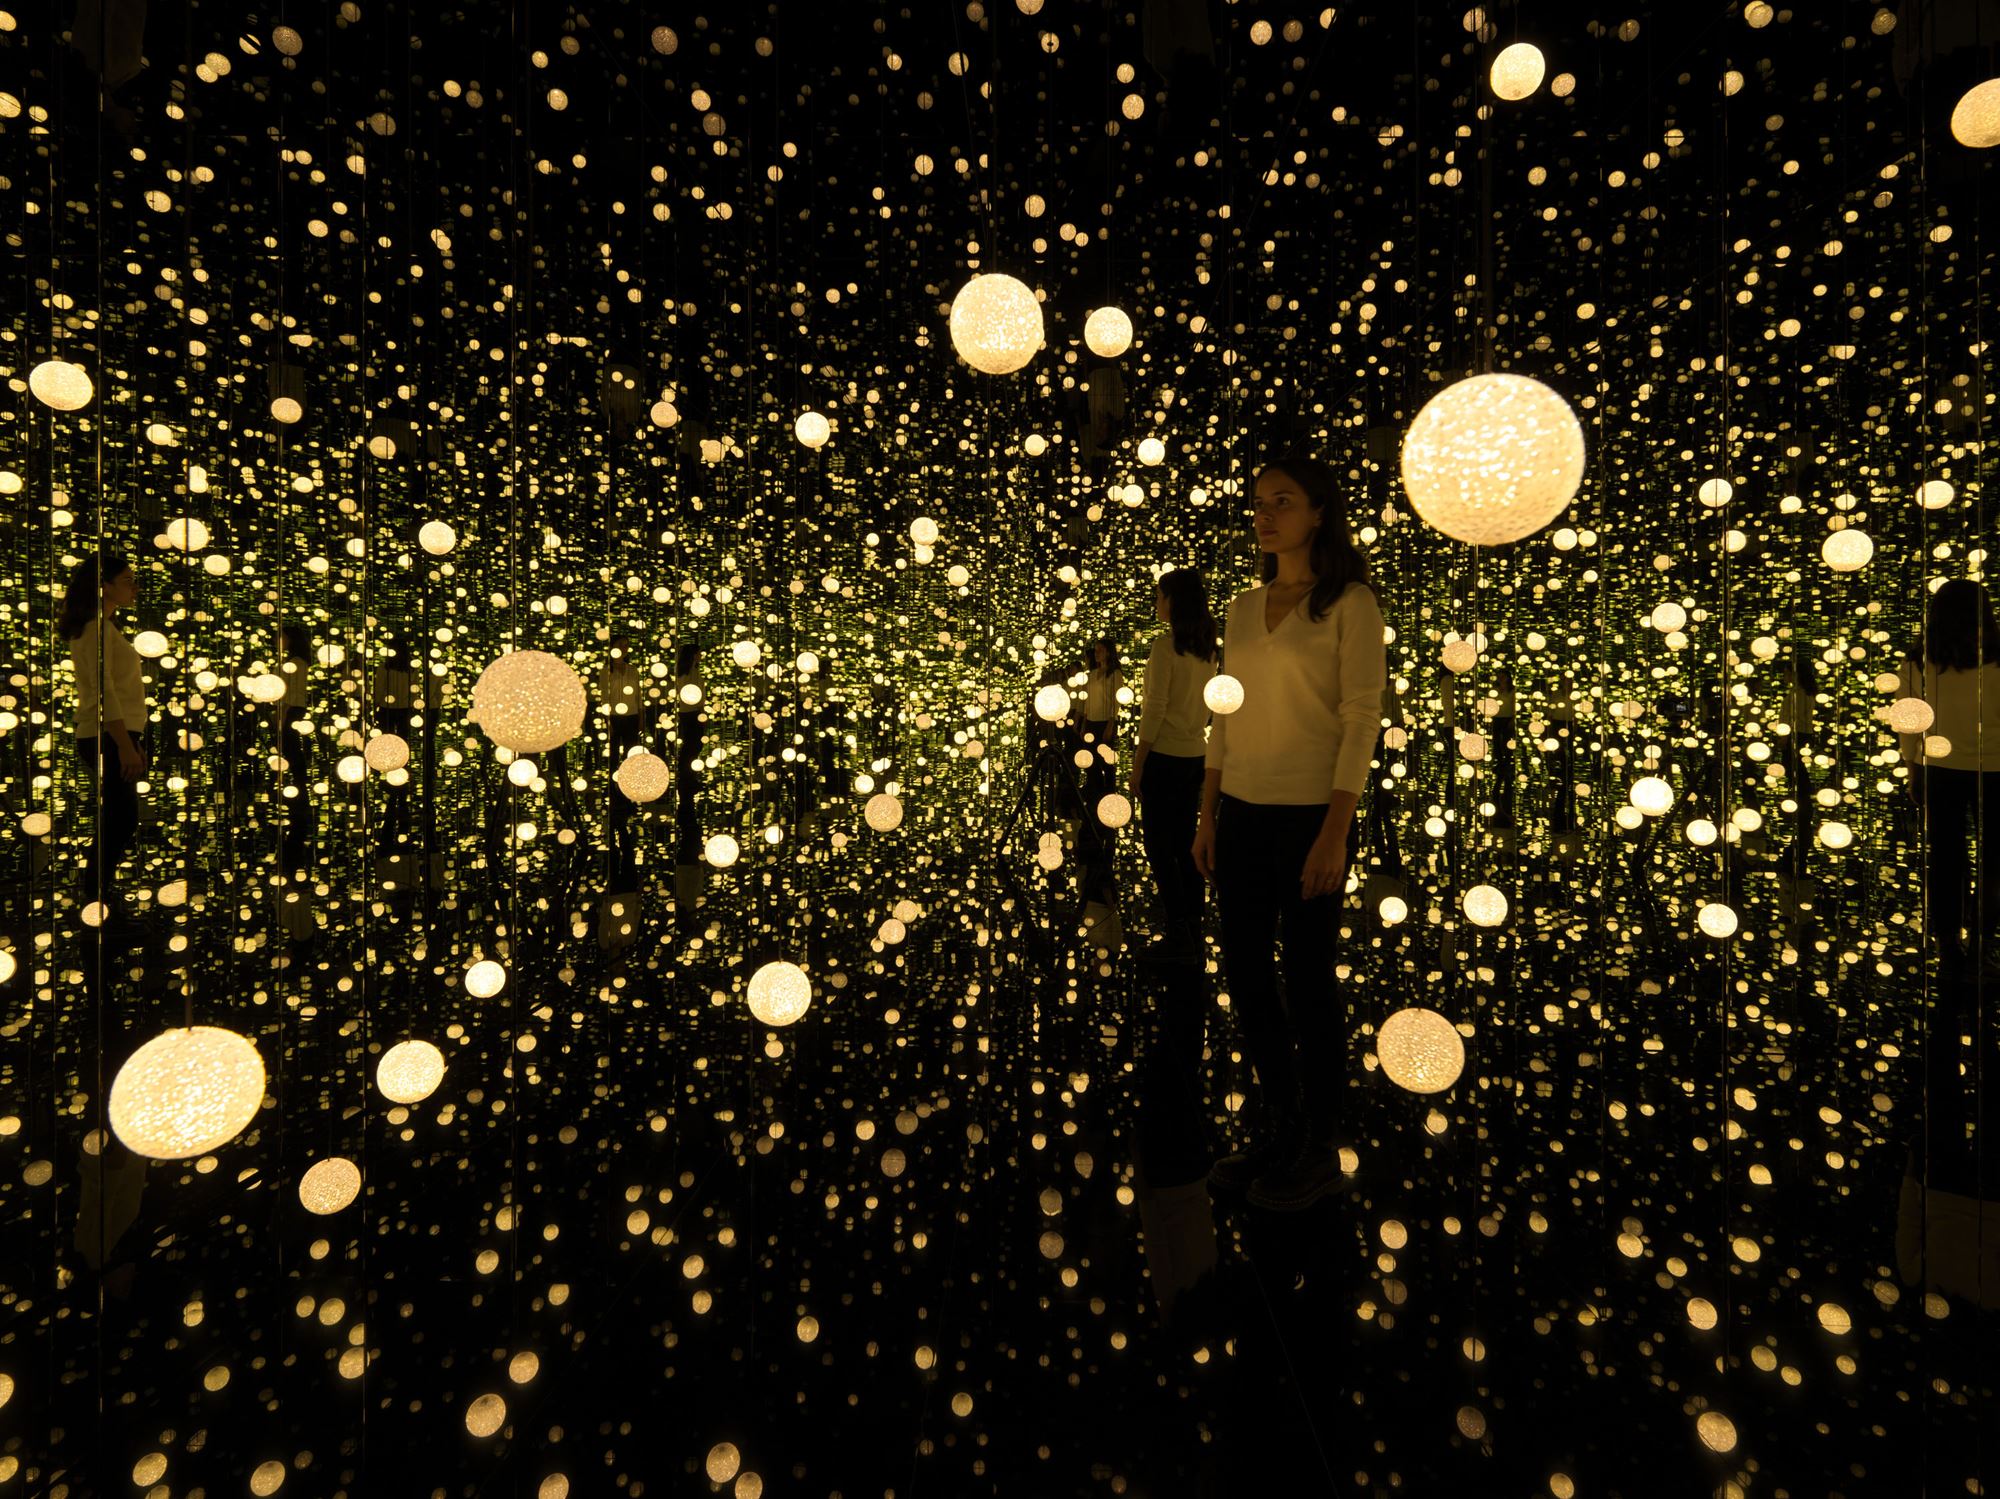 14 Best Places in the World to See Yayoi Kusama's Art